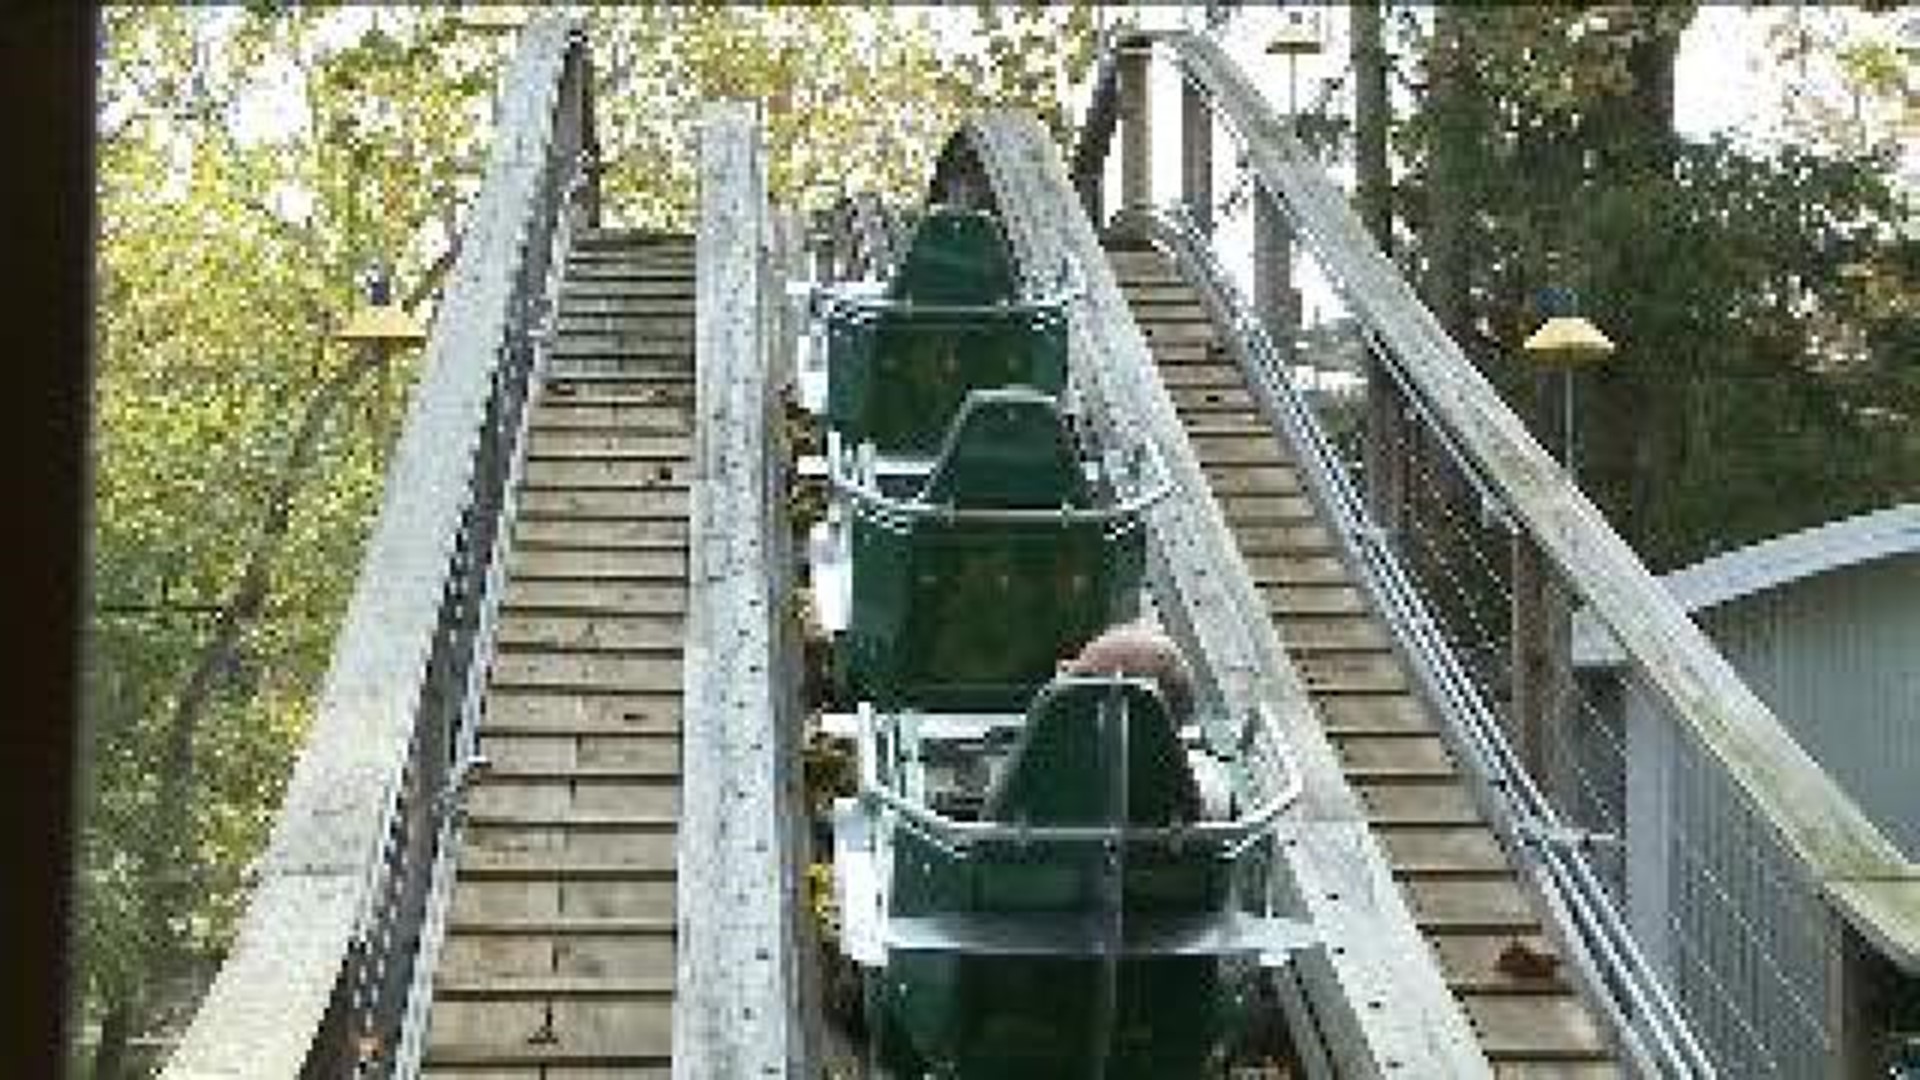 Flying Turns Takes Off at Knoebels